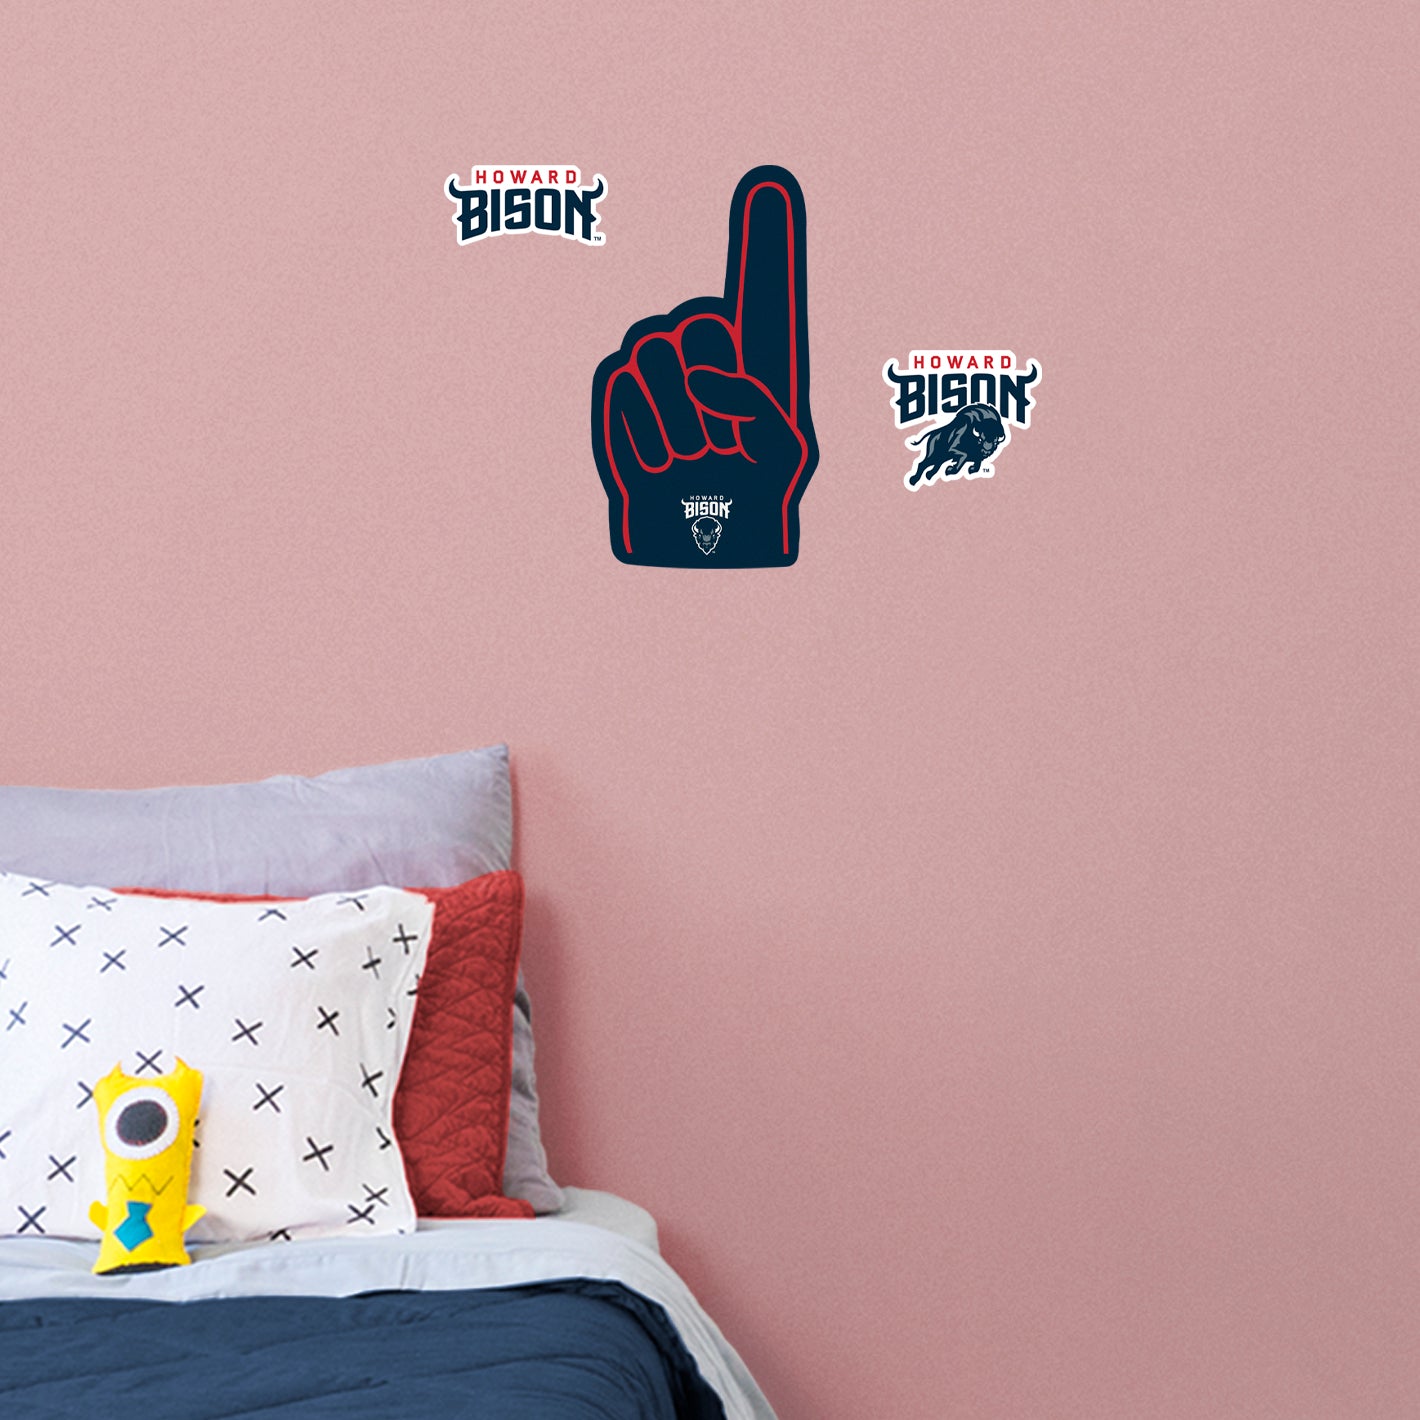 Howard Bison:  2021  Foam Finger        - Officially Licensed NCAA Removable     Adhesive Decal